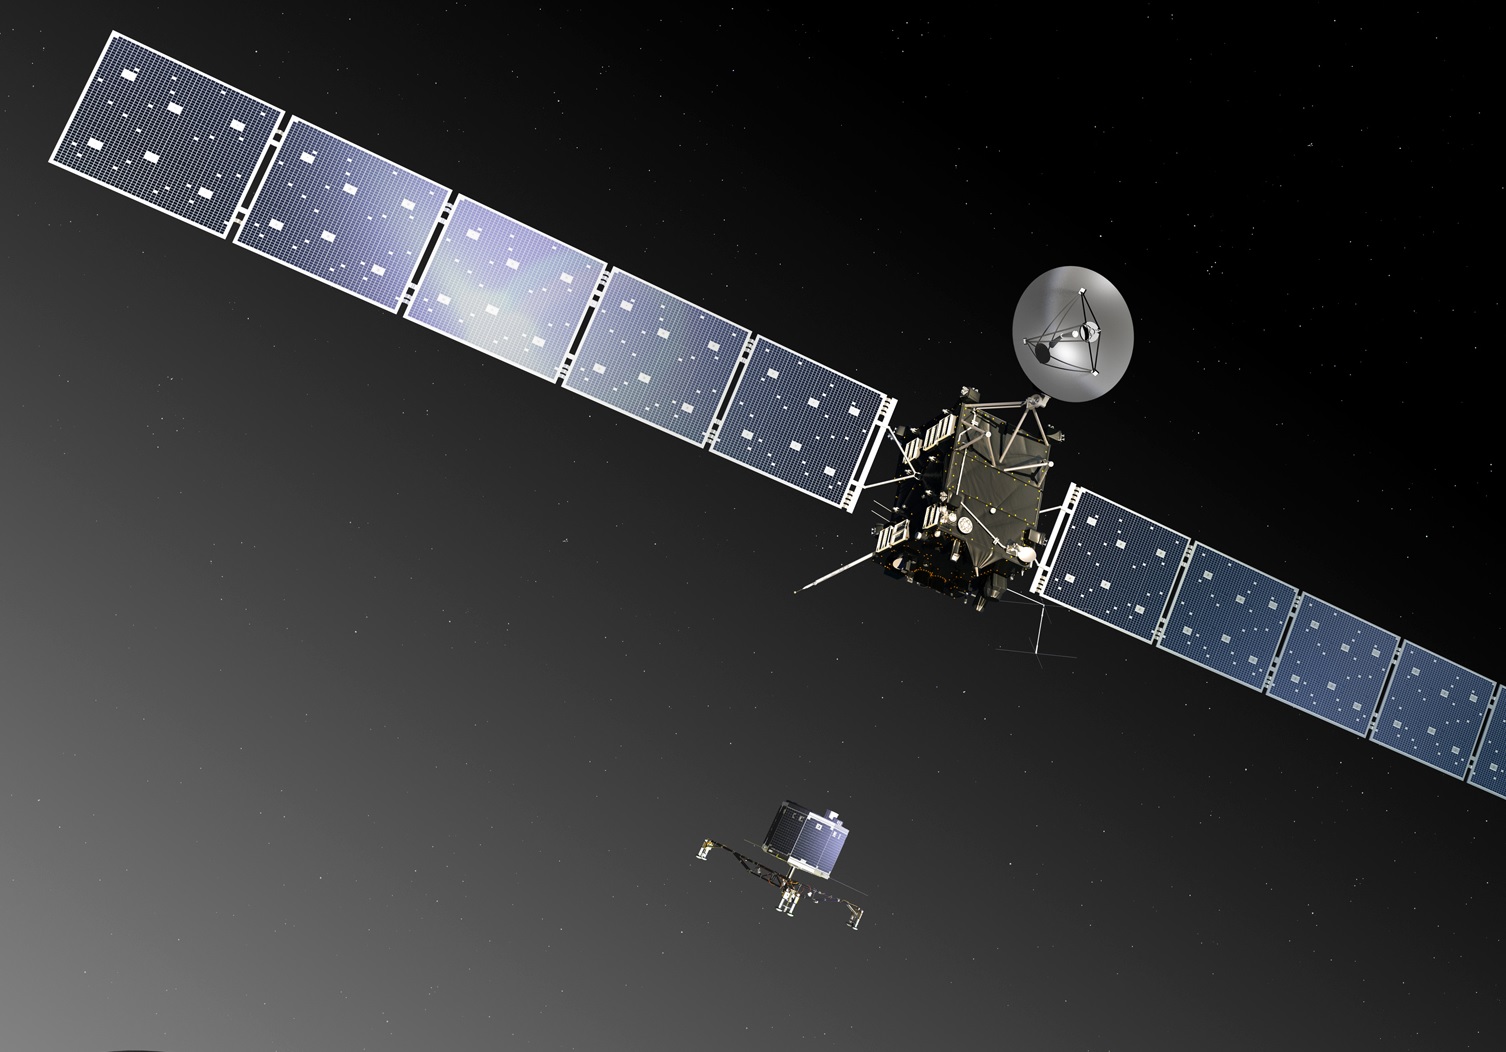 Rosetta mission: 20 years of launch of the research probe to comet Churiumov–Herasymenko